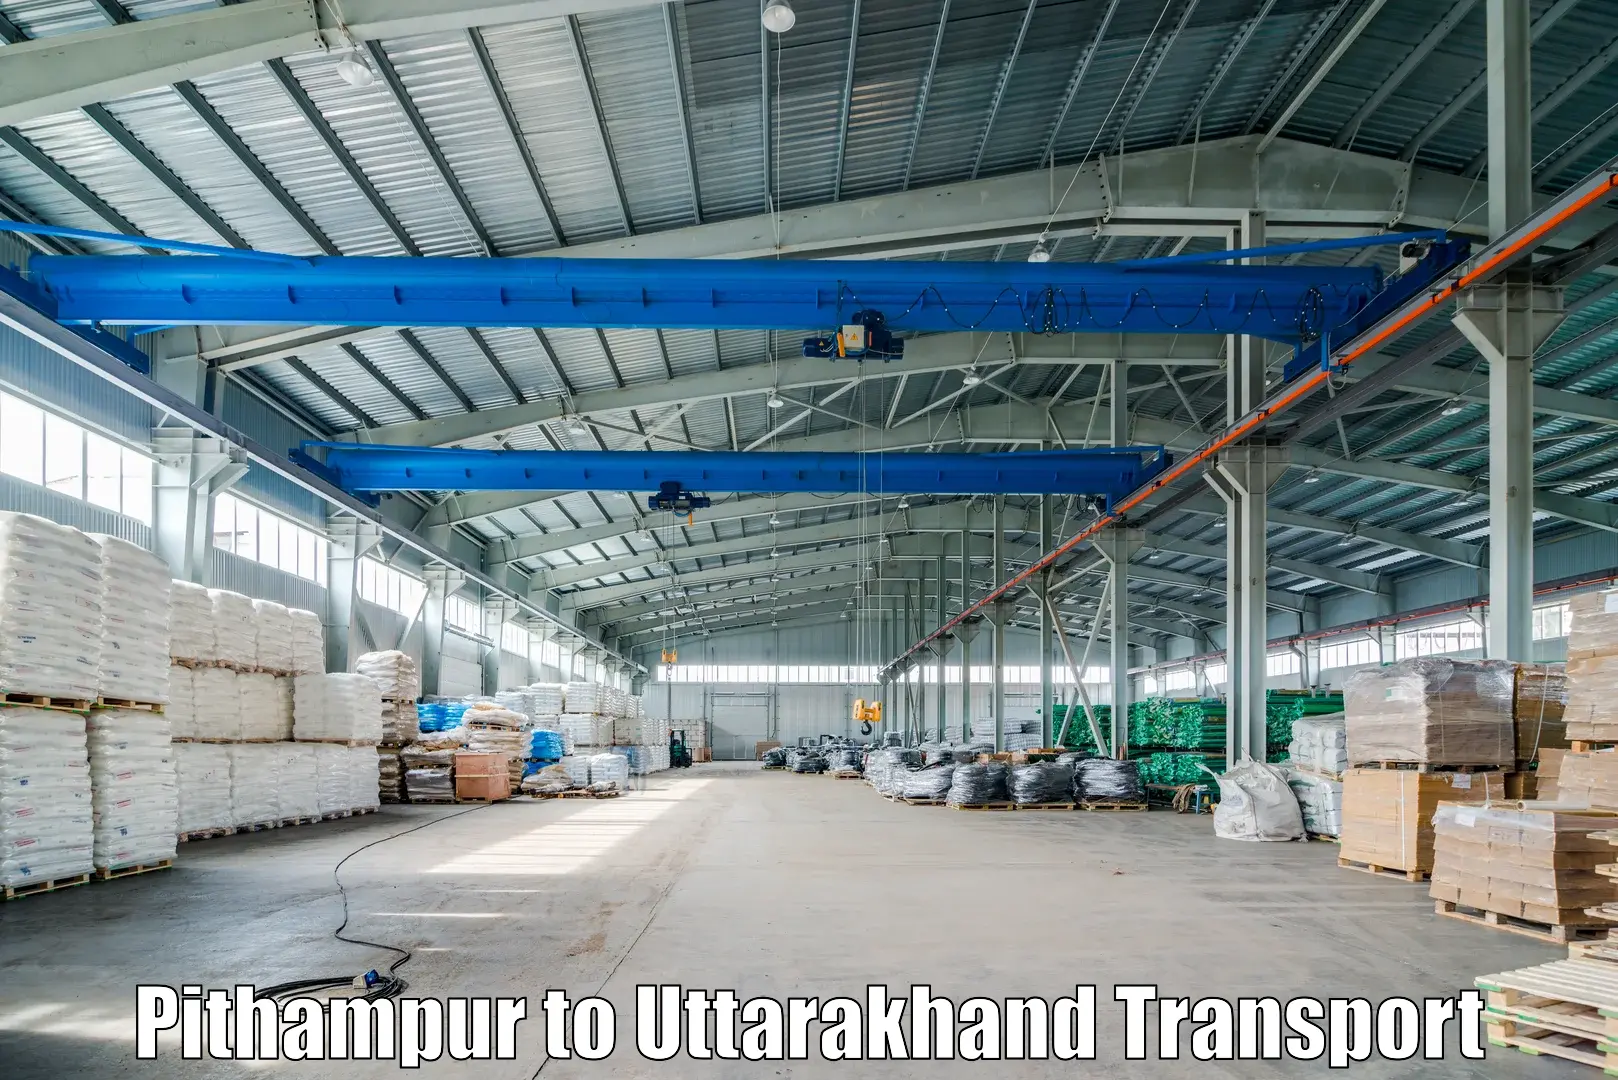 Truck transport companies in India Pithampur to Champawat